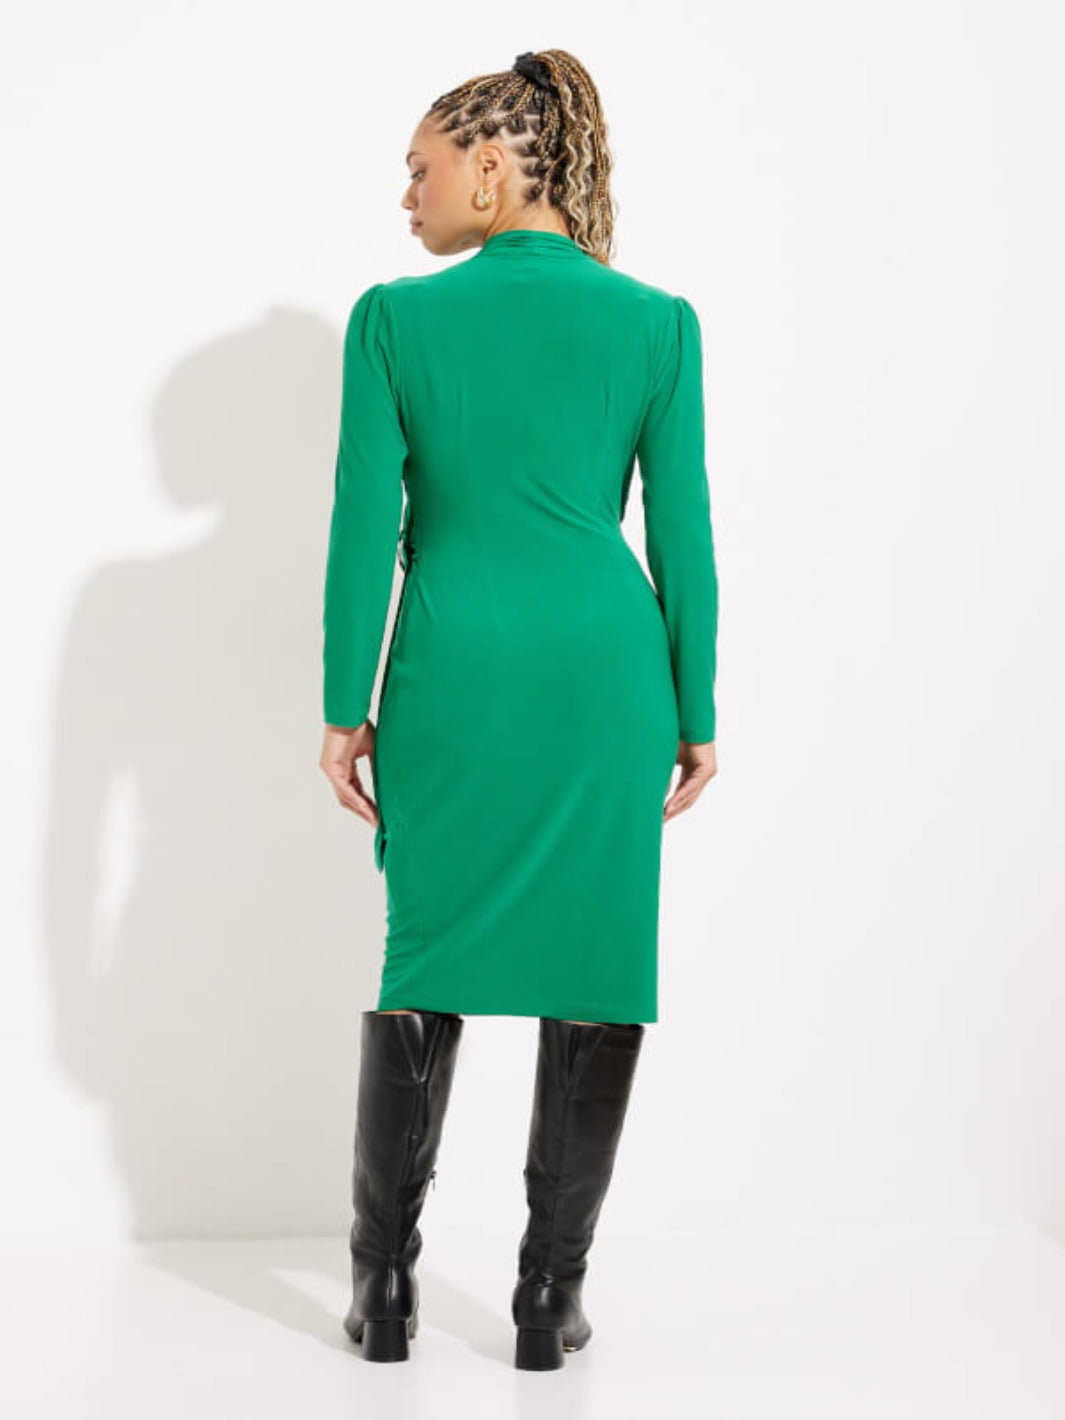 Joseph Ribkoff - Wrap Front Belted Dress in Green 233119-Nicola Ross